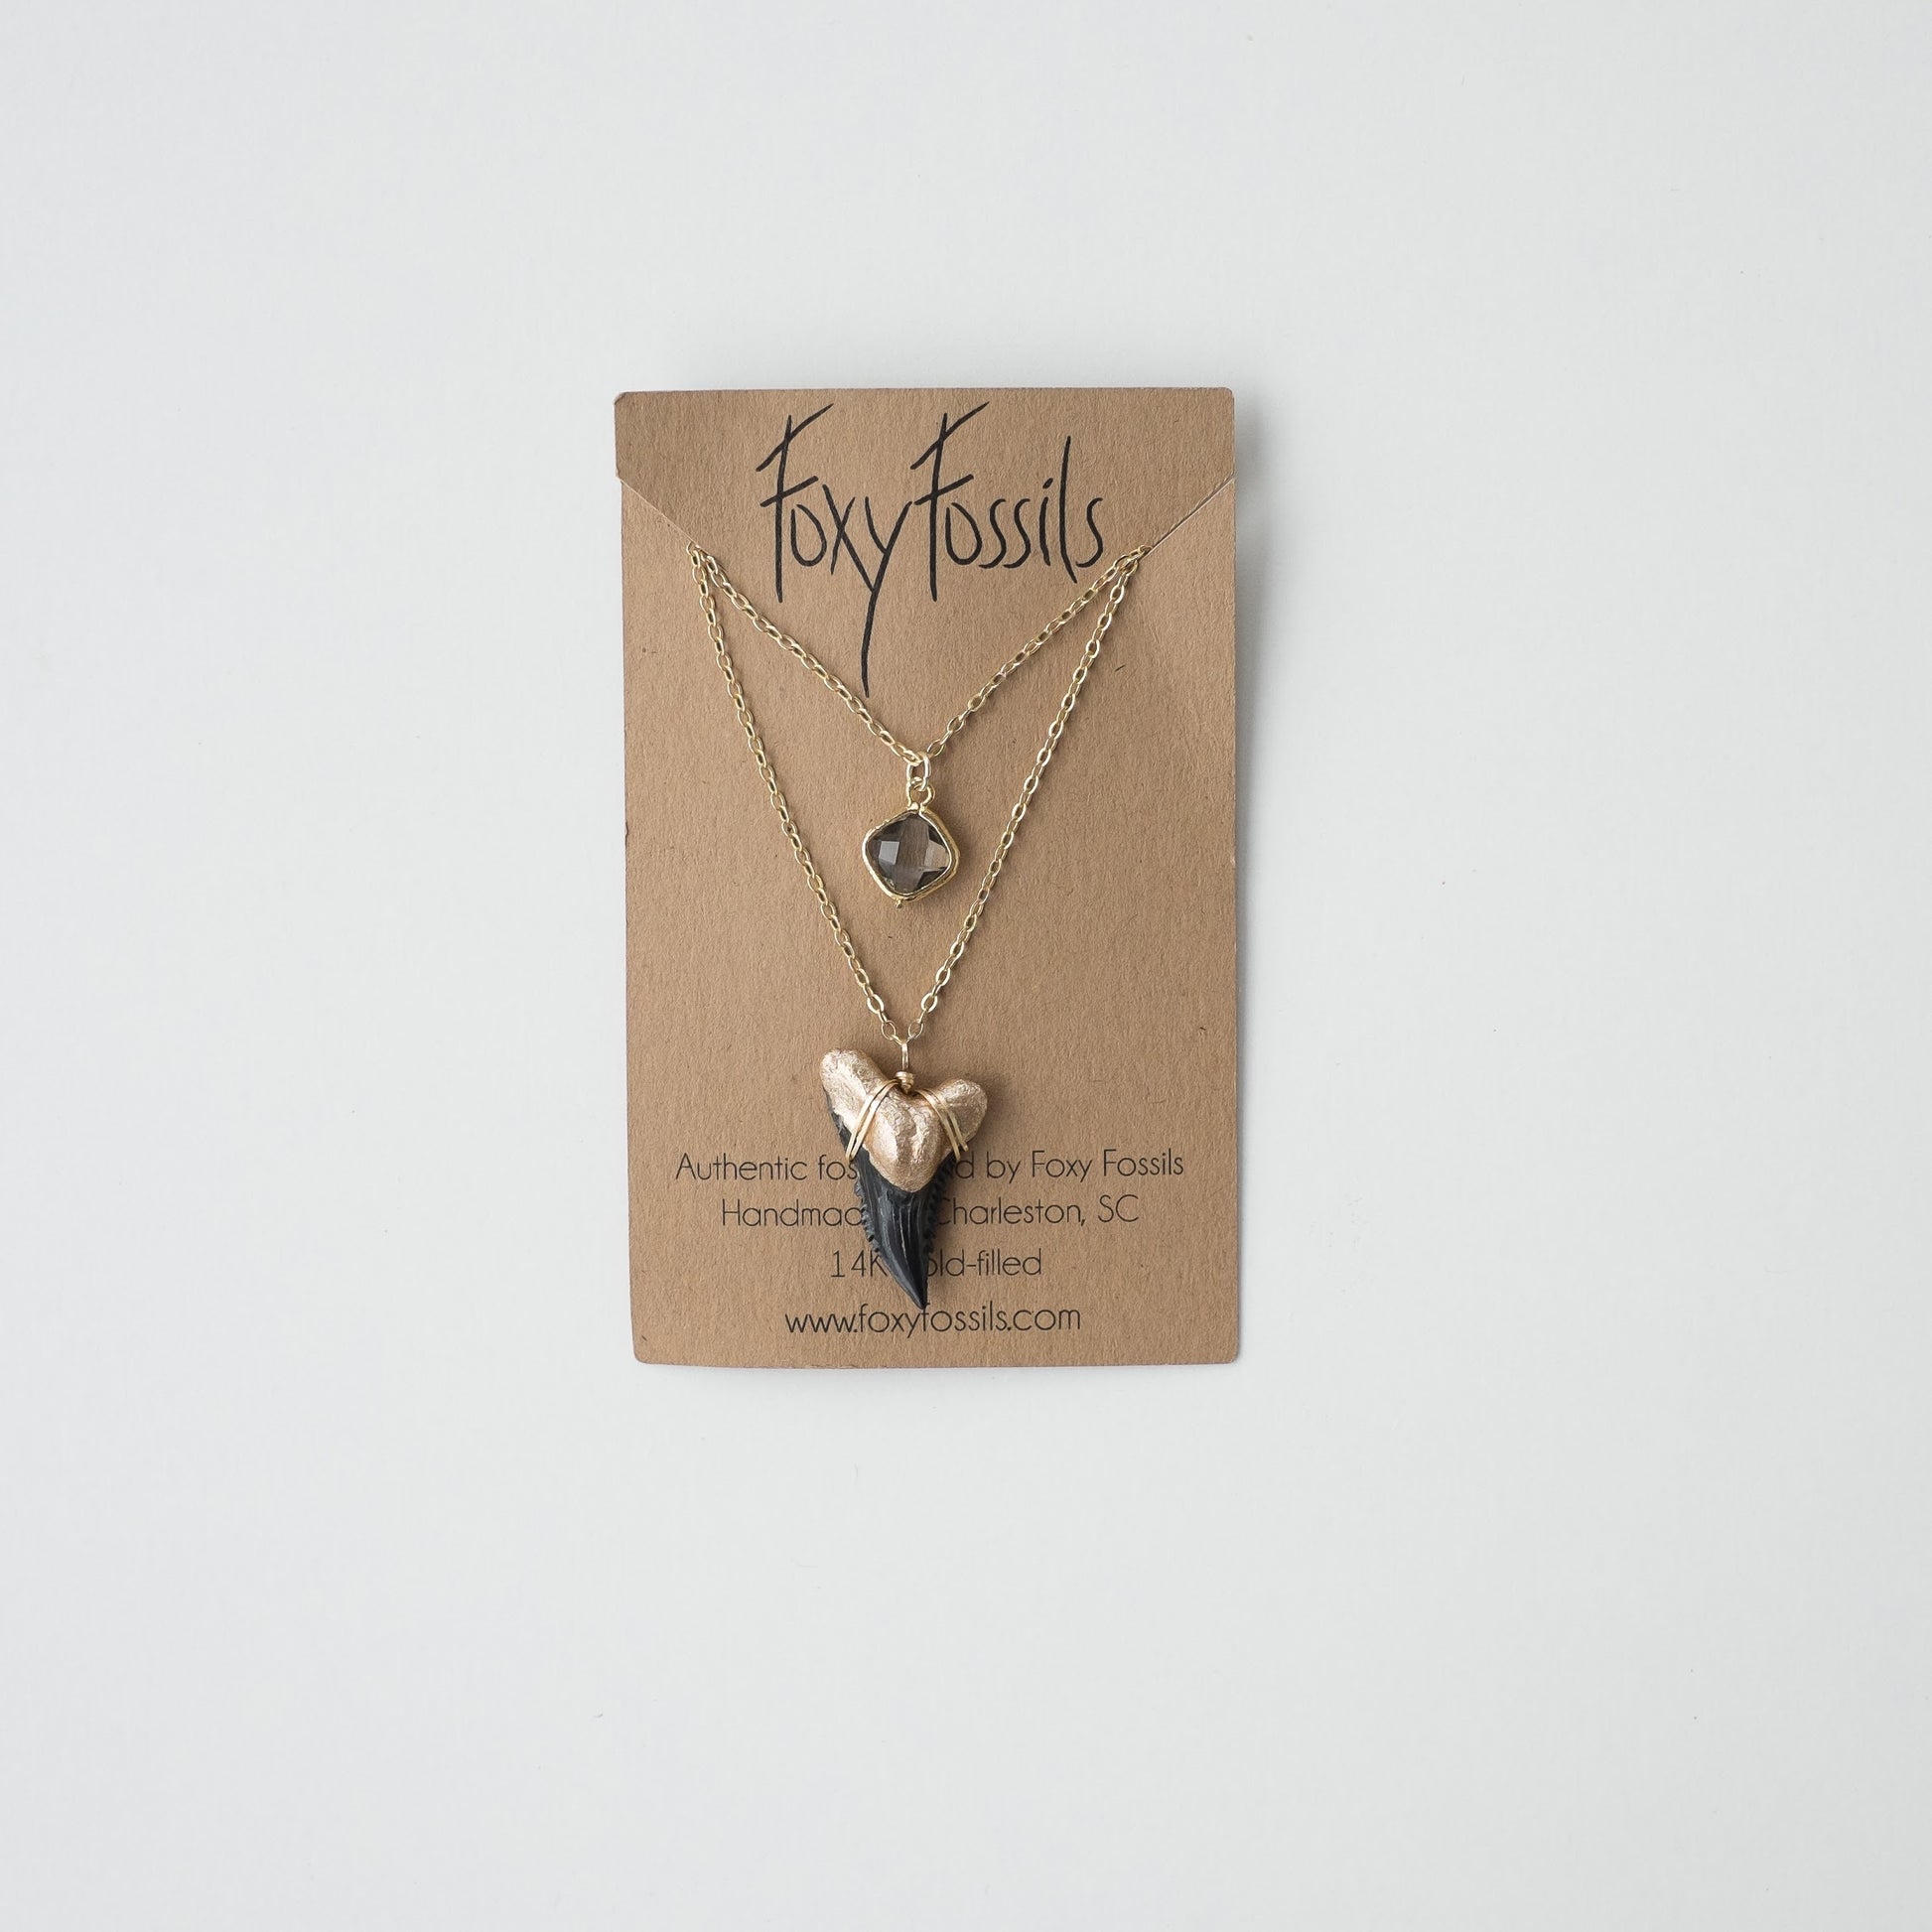 snaggletooth shark tooth layered necklace-sustainable shark jewelry using hemipristis serra fossils-foxy fossils